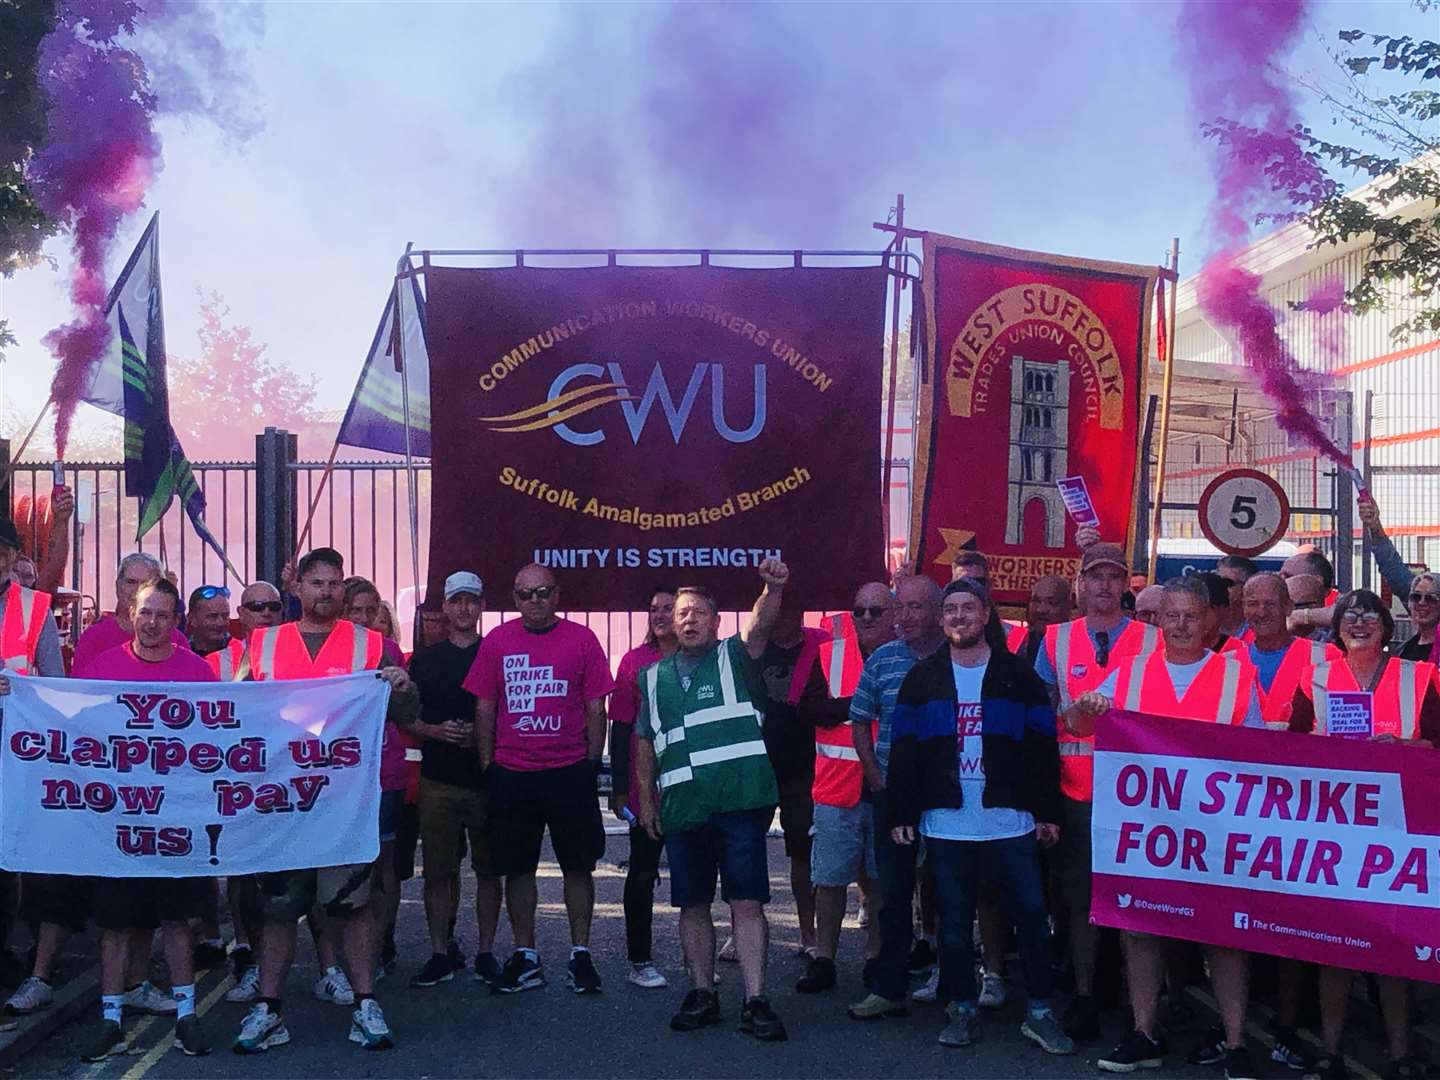 Postal workers are locked in a bitter dispute with bosses over pay and working conditions